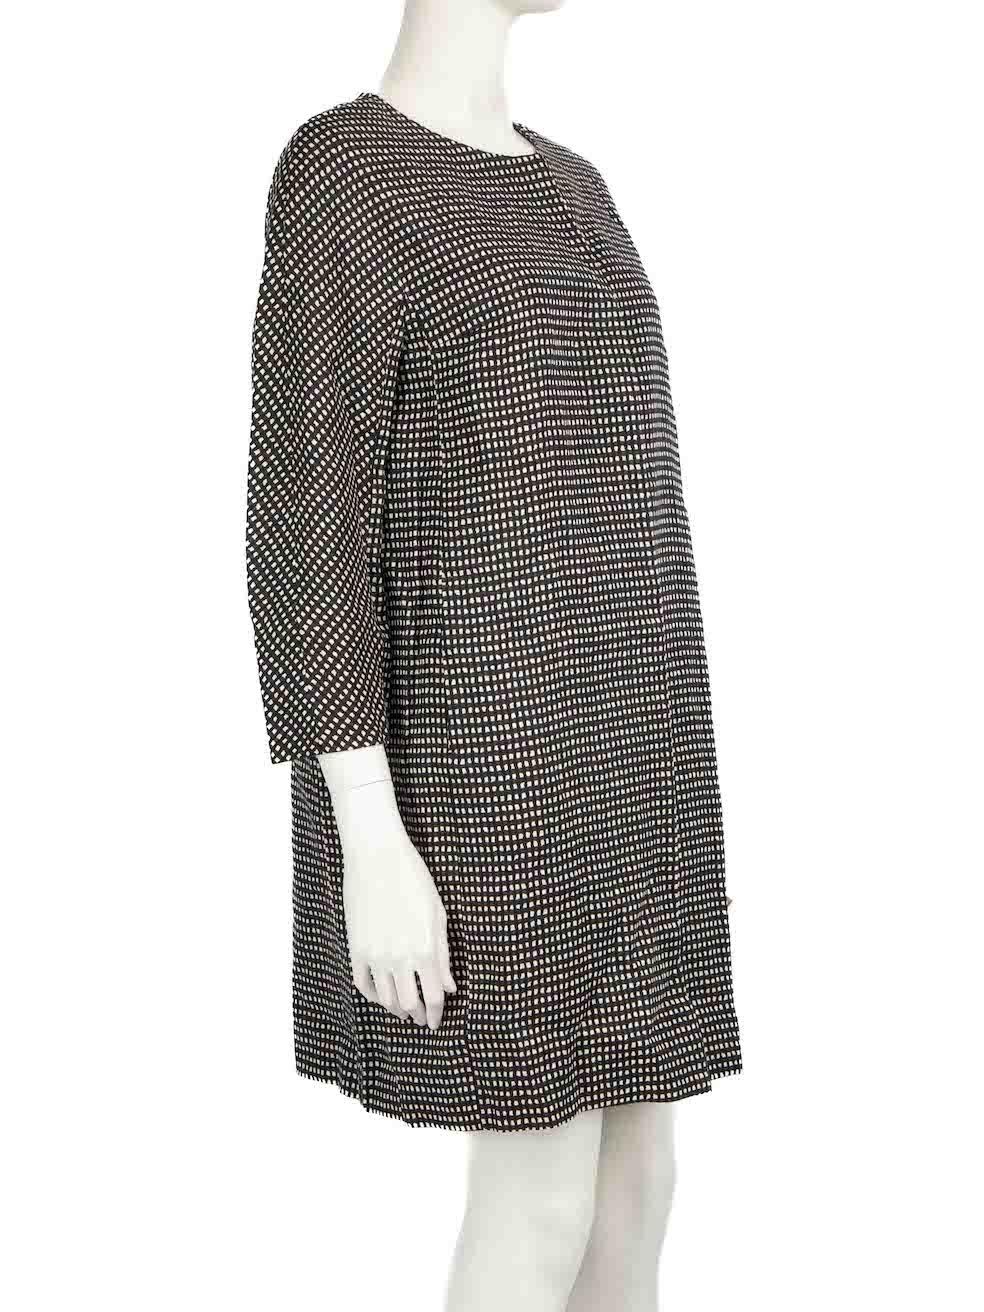 CONDITION is Never worn, with tags. No visible wear to coat is evident on this new Weekend Max Mara designer resale item.
 
 
 
 Details
 
 
 Black
 
 Linen
 
 Coat
 
 Checkered pattern
 
 Single breasted
 
 Snap button fastening
 
 2x Side pockets
